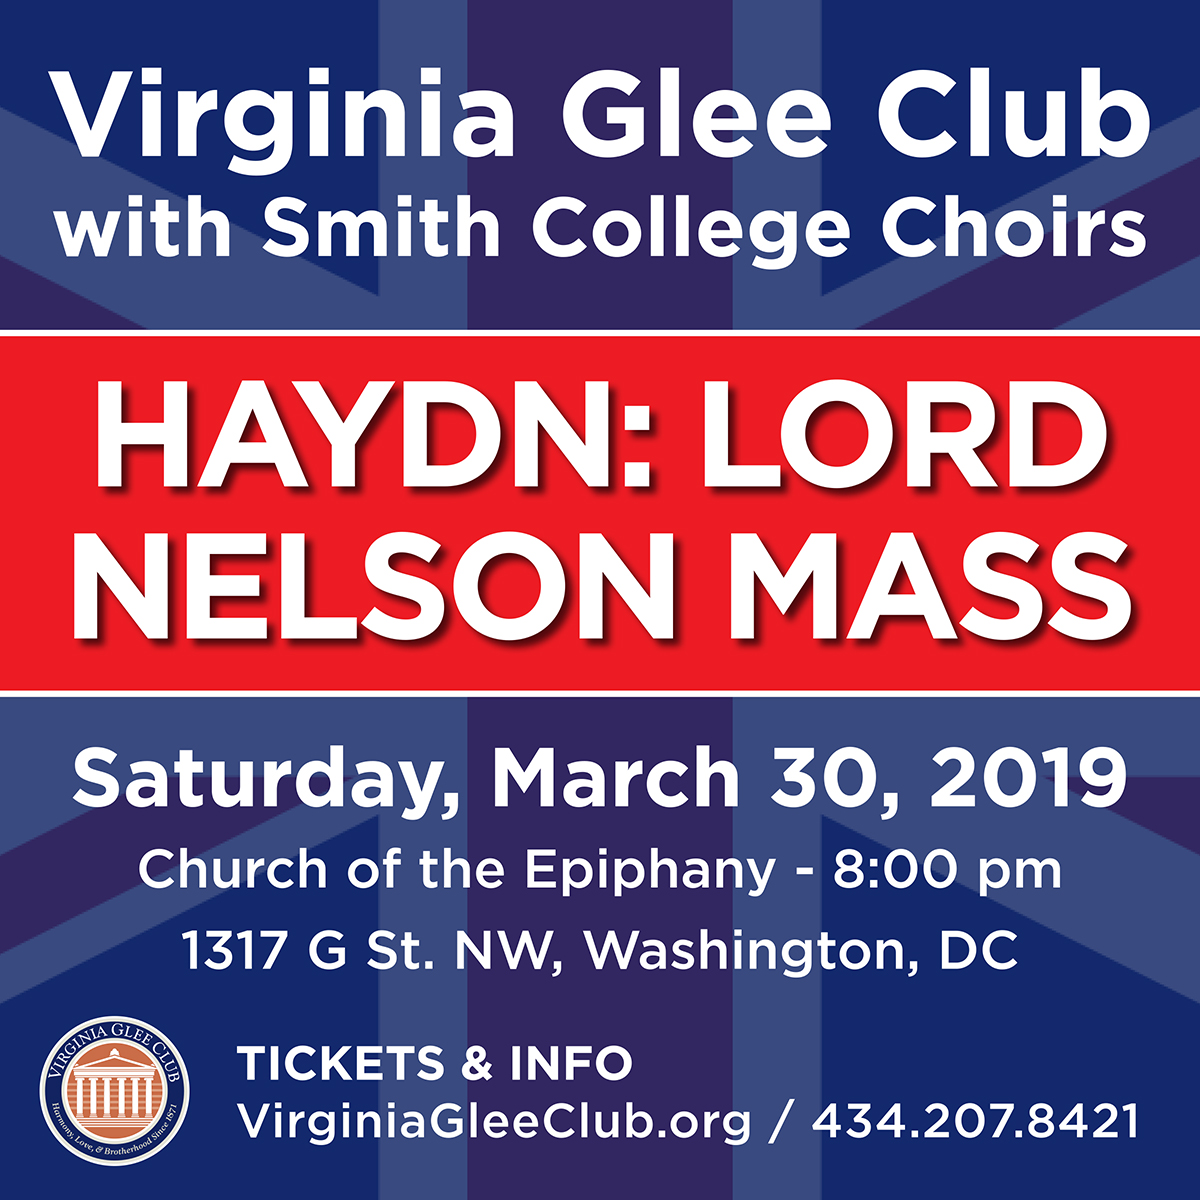 Haydn: Lord Nelson Mass with Smith College Choirs